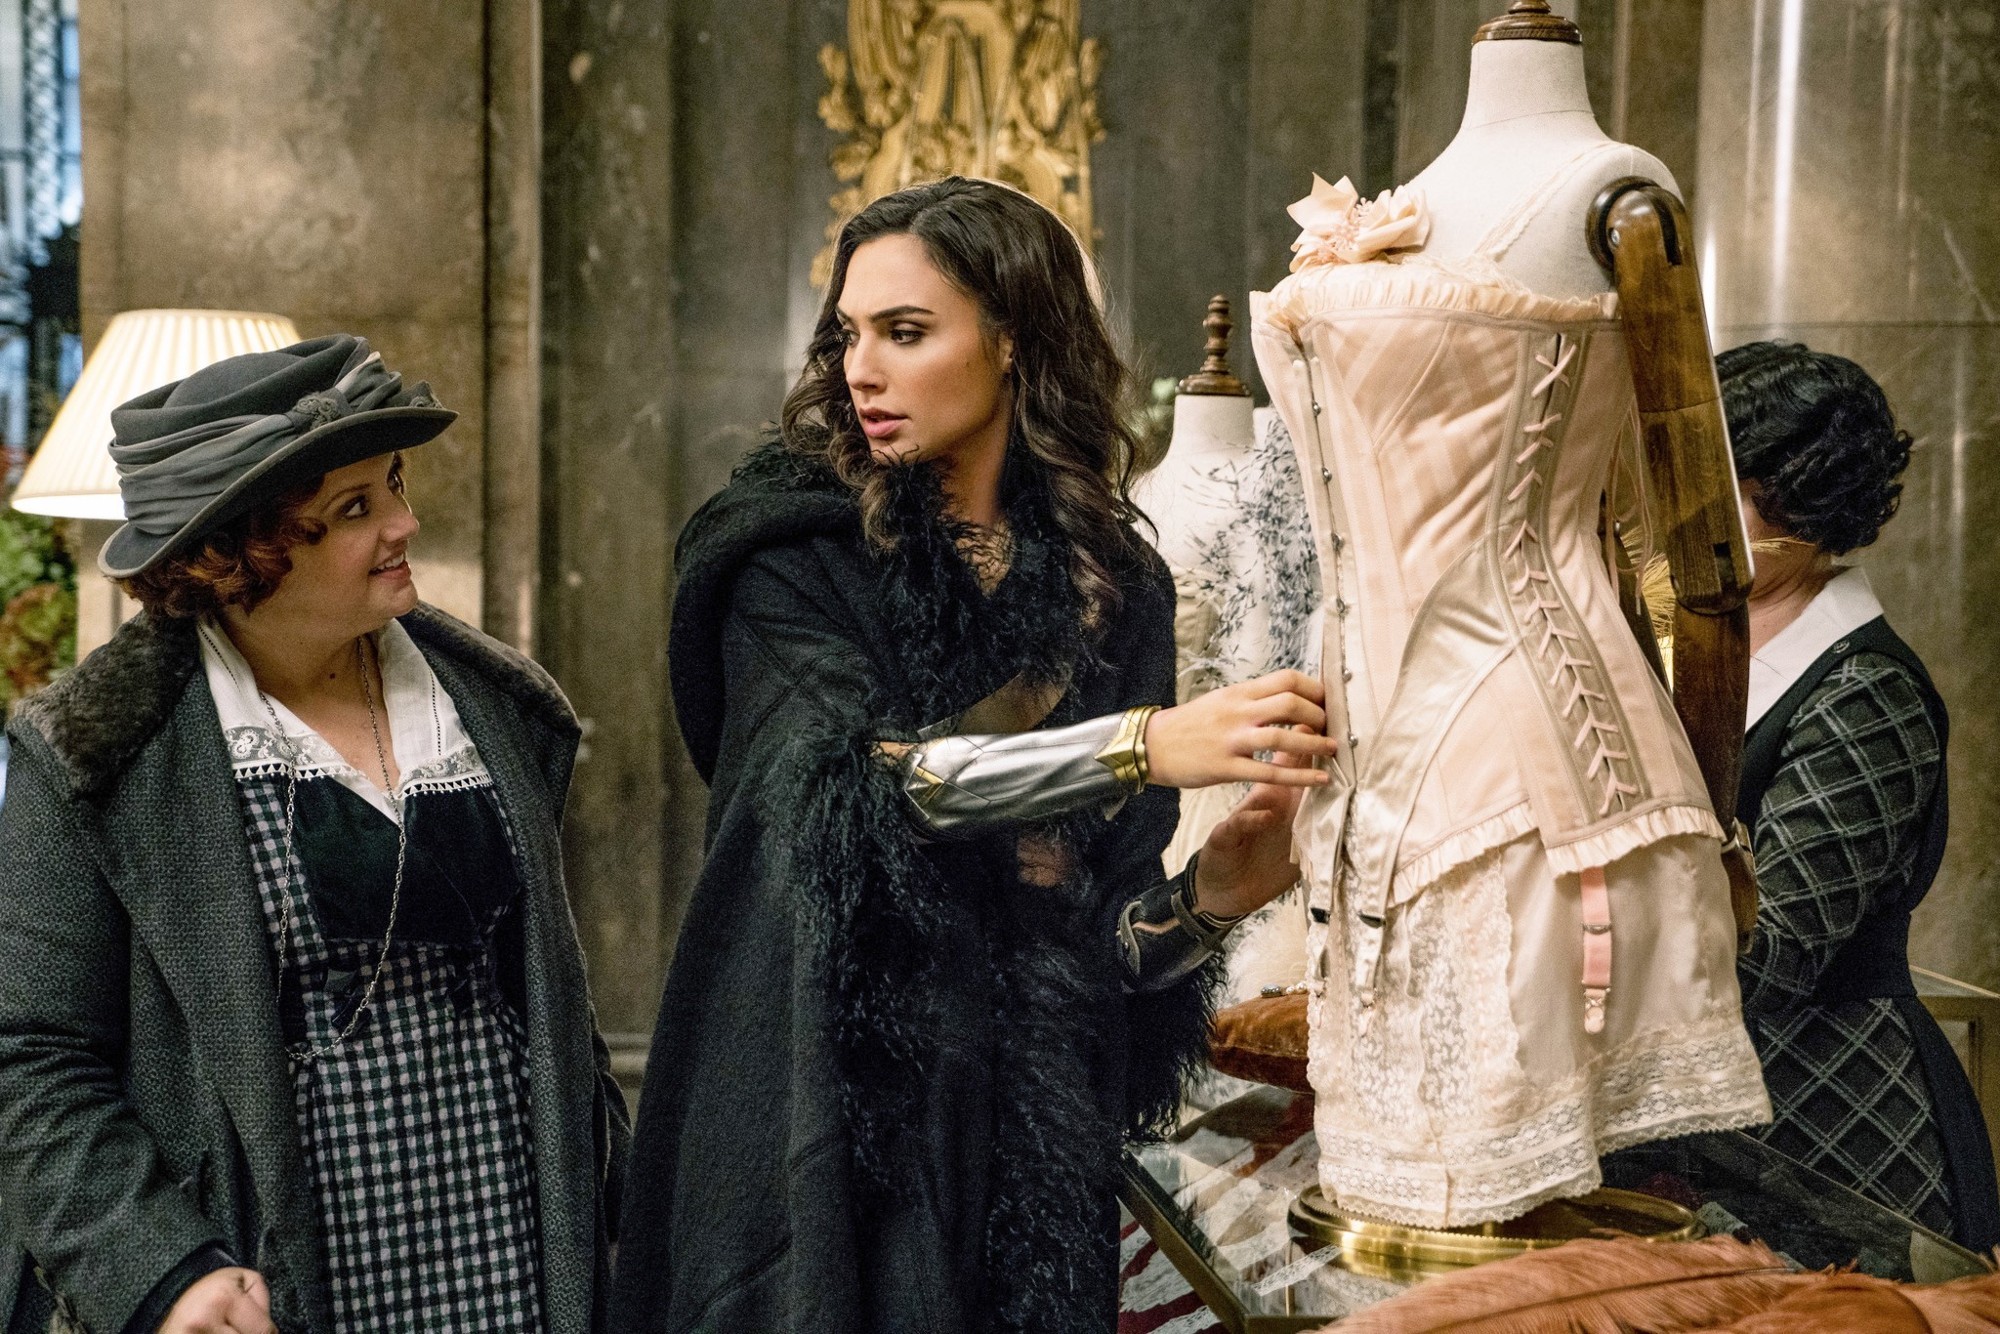 Lucy Davis stars as Etta Candy and Gal Gadot stars as Diana Prince/Wonder Woman in Warner Bros. Pictures' Wonder Woman (2017)